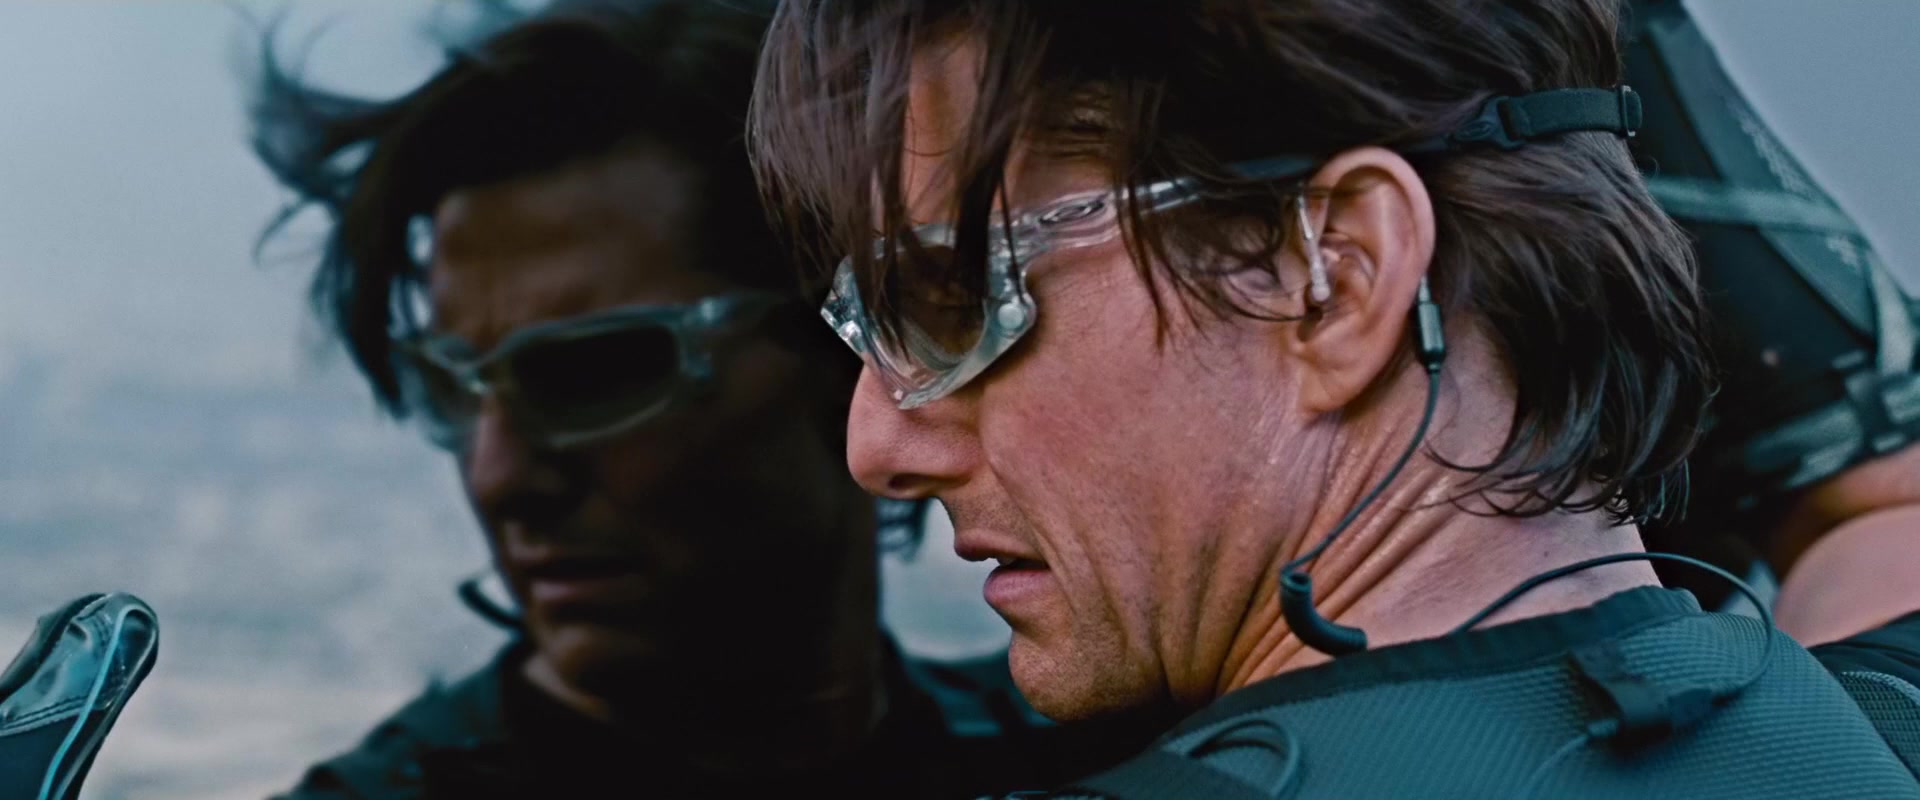 oakley romeo mission impossible 2